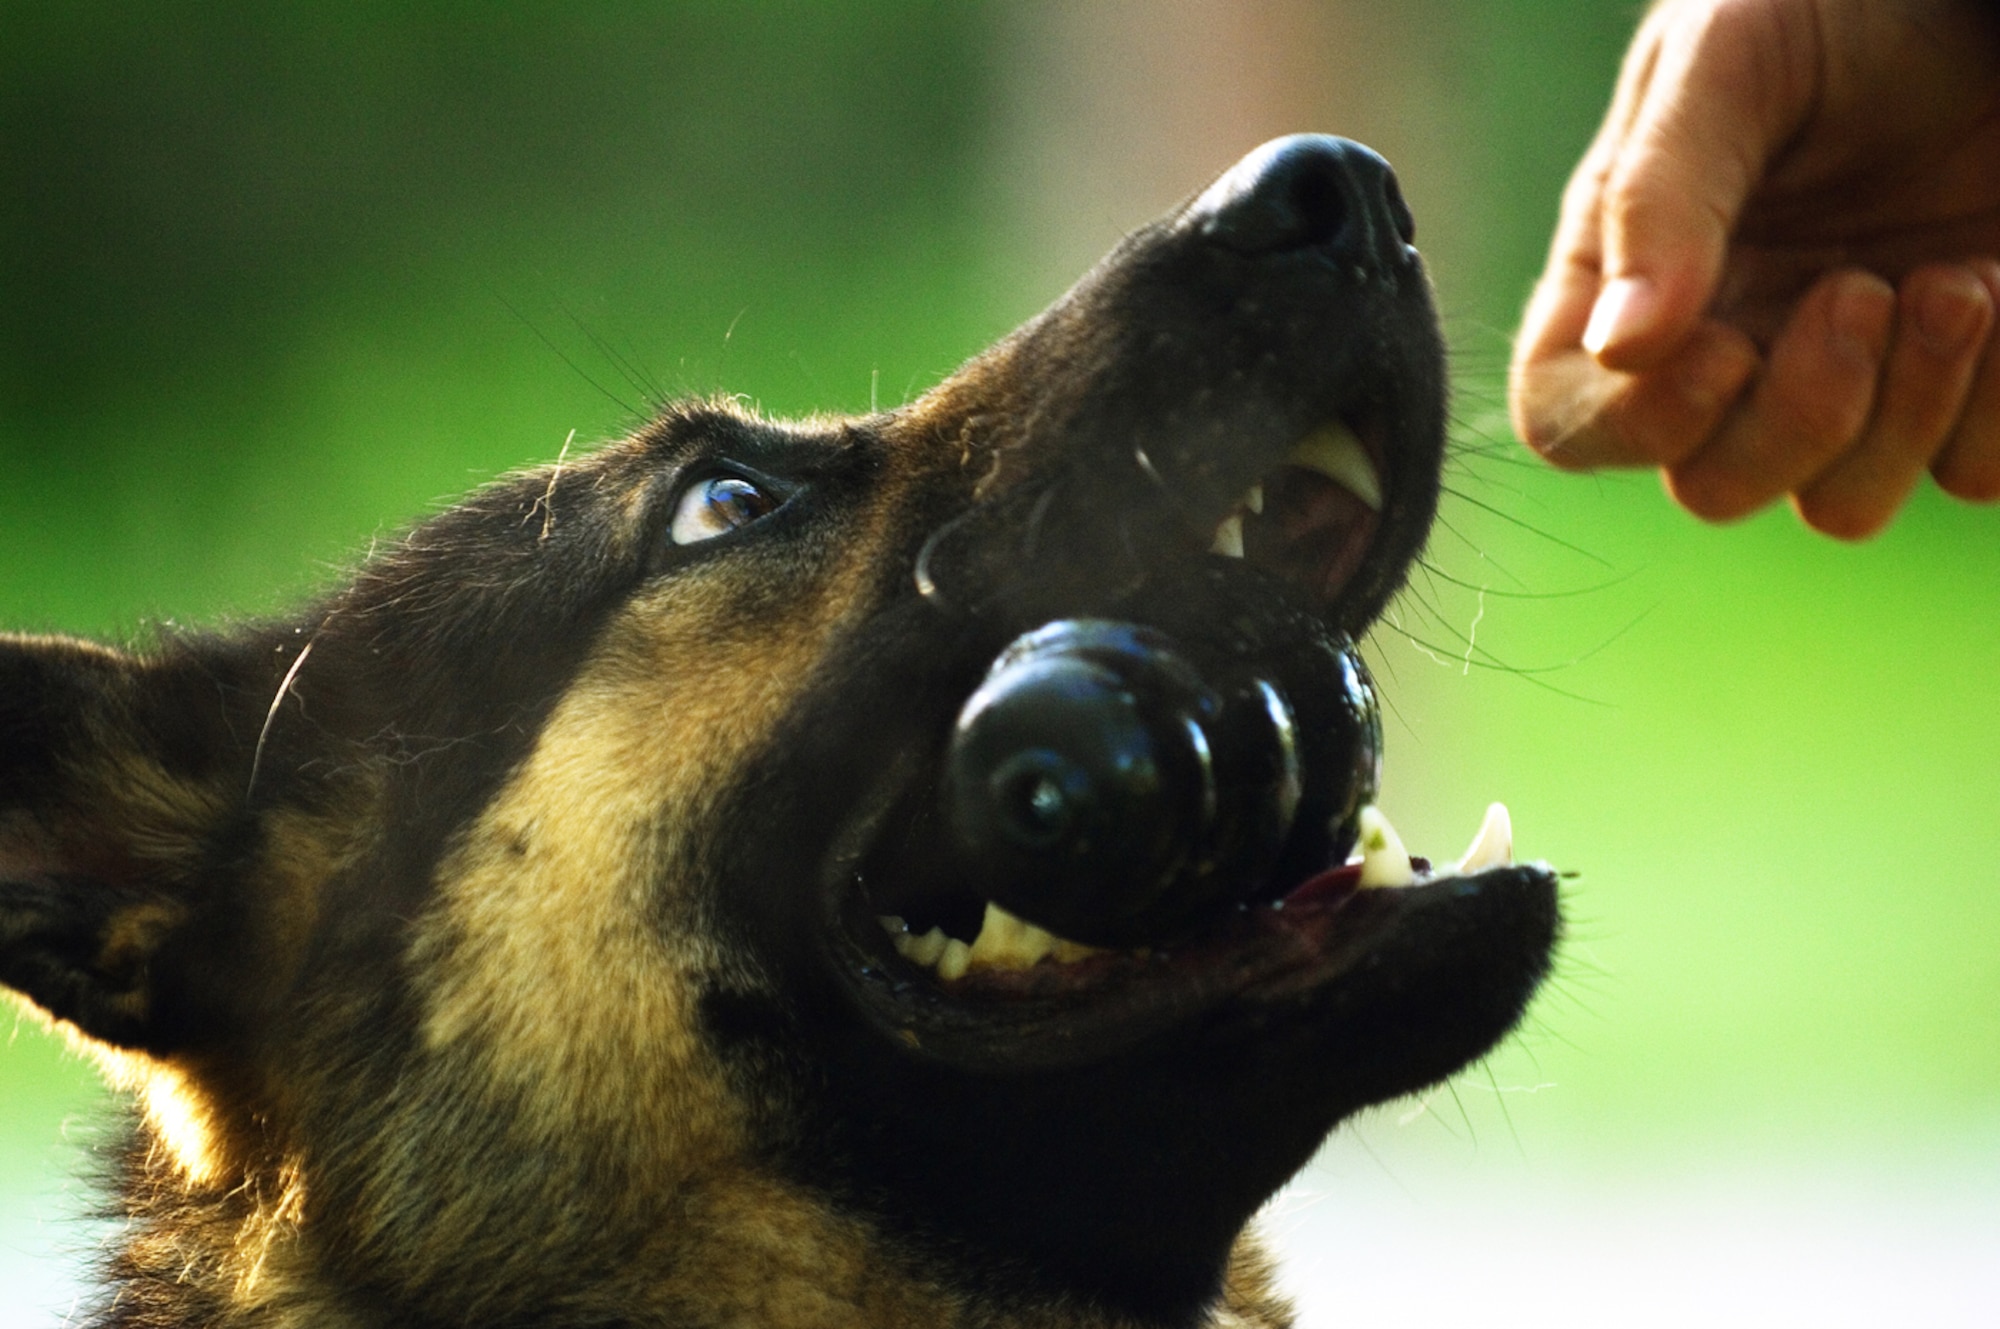 Rewarding a dog during obedience training can be a tricky bussiness. A lot of bite injuries occur when trainers put their hands close to a dog's mouth and lose situational awareness. The dogs tend to grab the first object they see with their teeth. (photo by Tech. Sgt. Matthew Hannen)